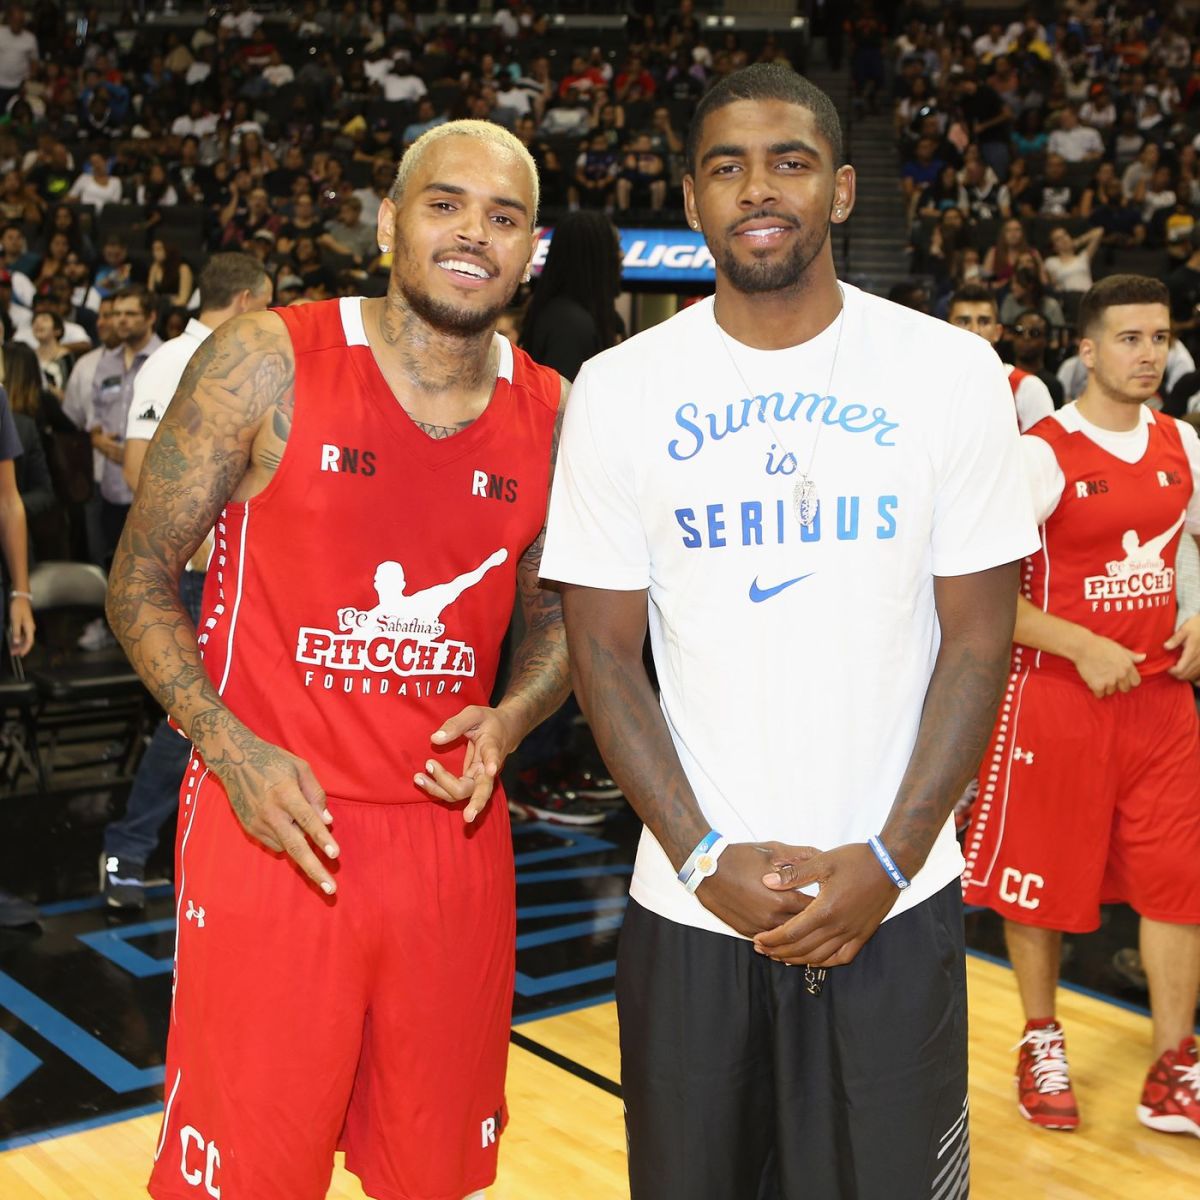 Chris Brown Back Kyrie Irving For Not Taking The Vaccine: "The Real Hero. I Stand With My Brother... Its His Choice And A Damn Good One."